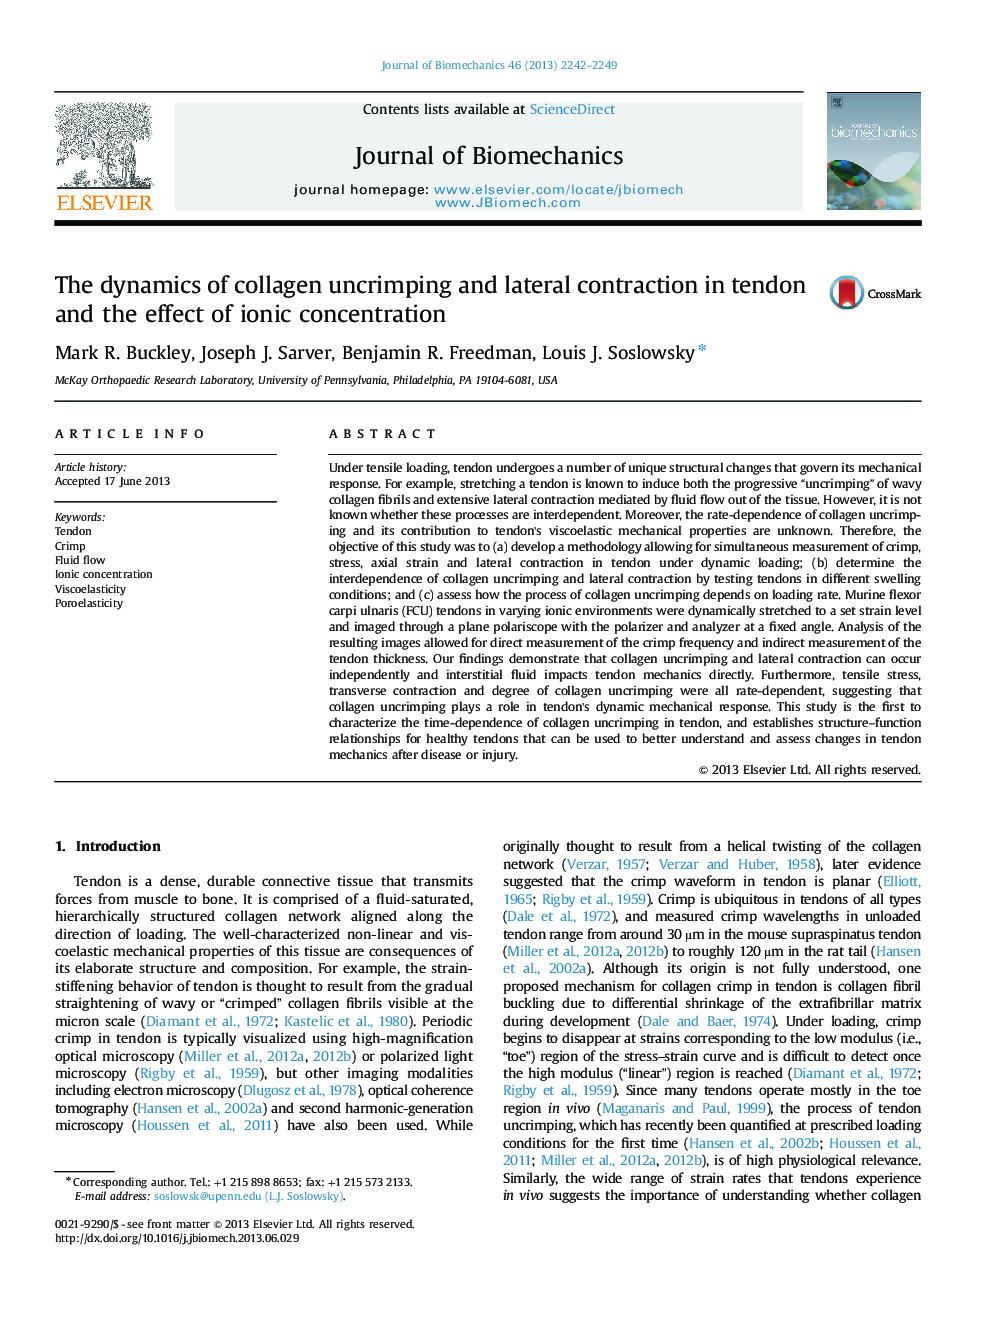 The dynamics of collagen uncrimping and lateral contraction in tendon and the effect of ionic concentration